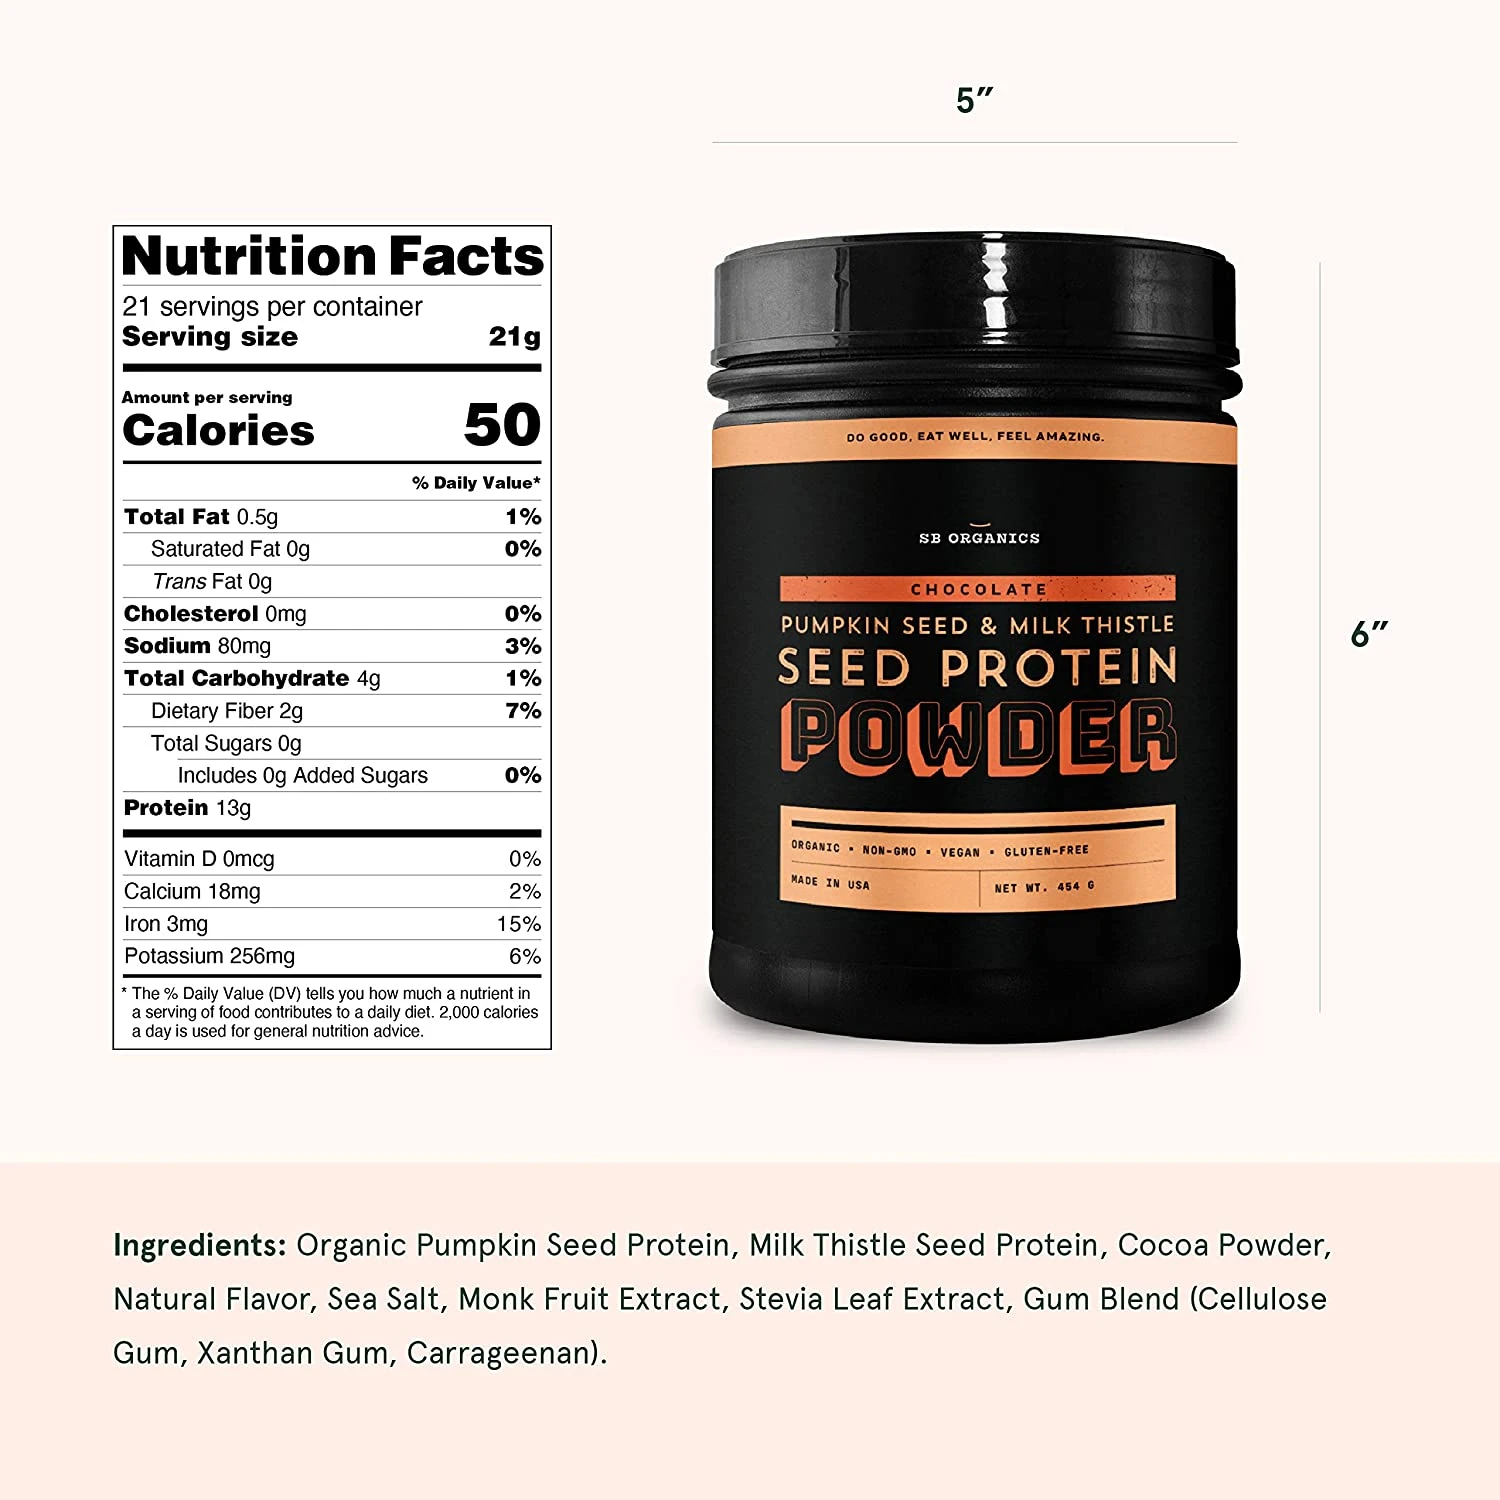 SB Organics Pumpkin Seed & Milk Thistle Seed Vegan Protein Powder Canister of Chocolate Plant Based Protein